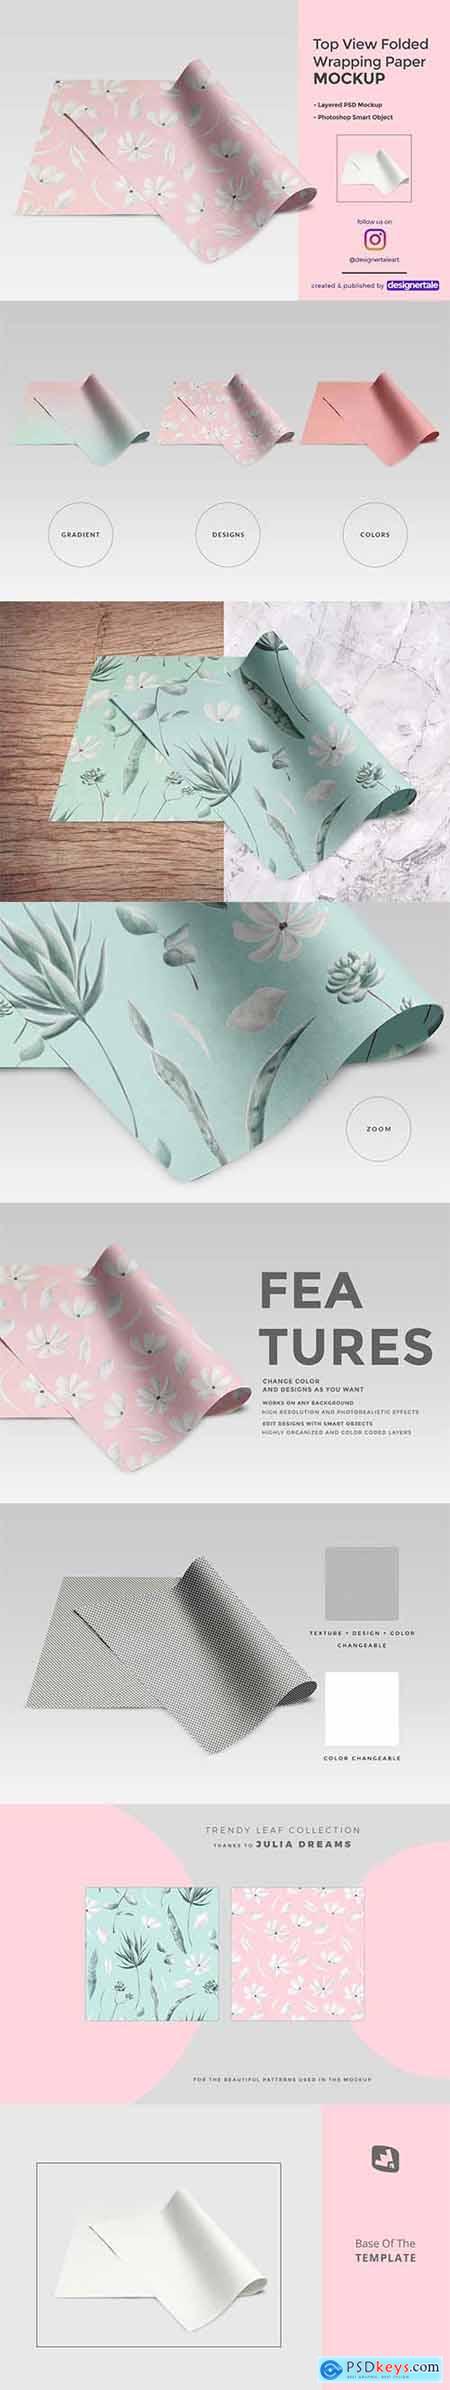 TopView Folded Wrapping Paper Mockup 4446099